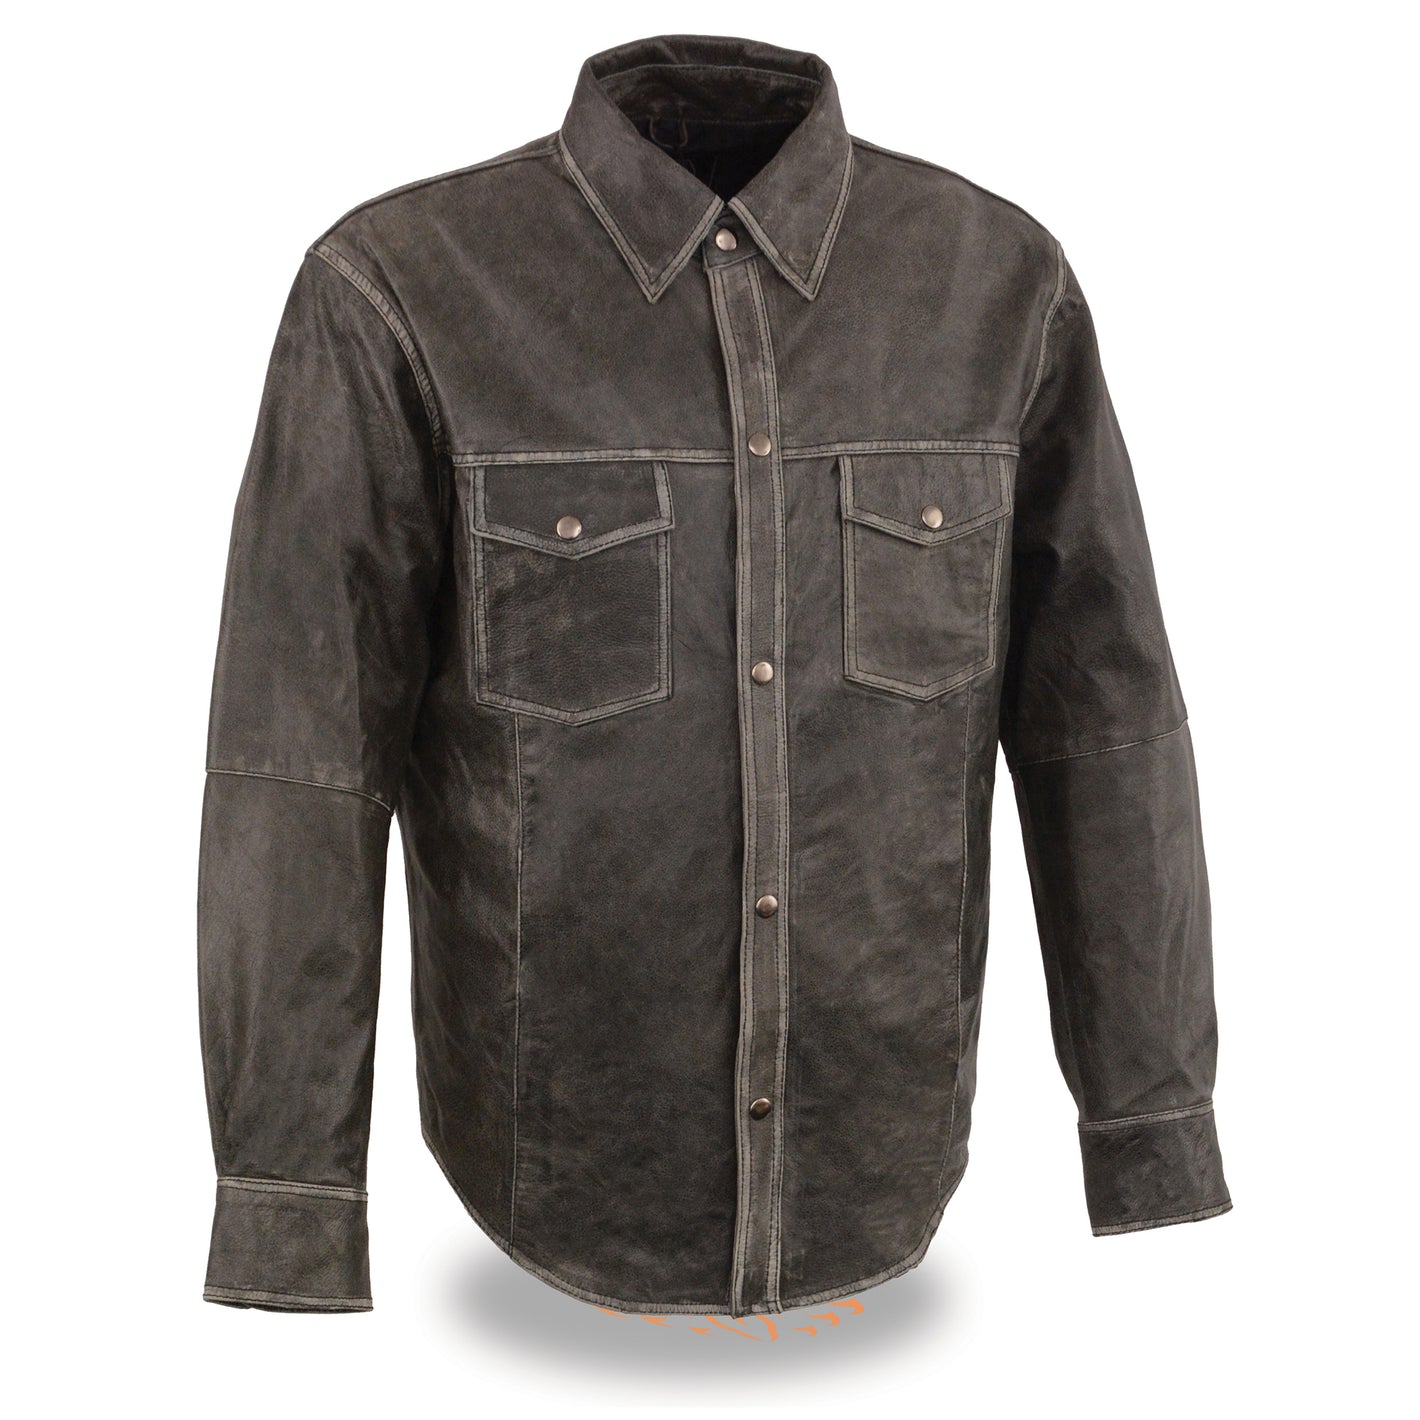 Men's Distressed Gray Lightweight Leather Snap Front Shirt